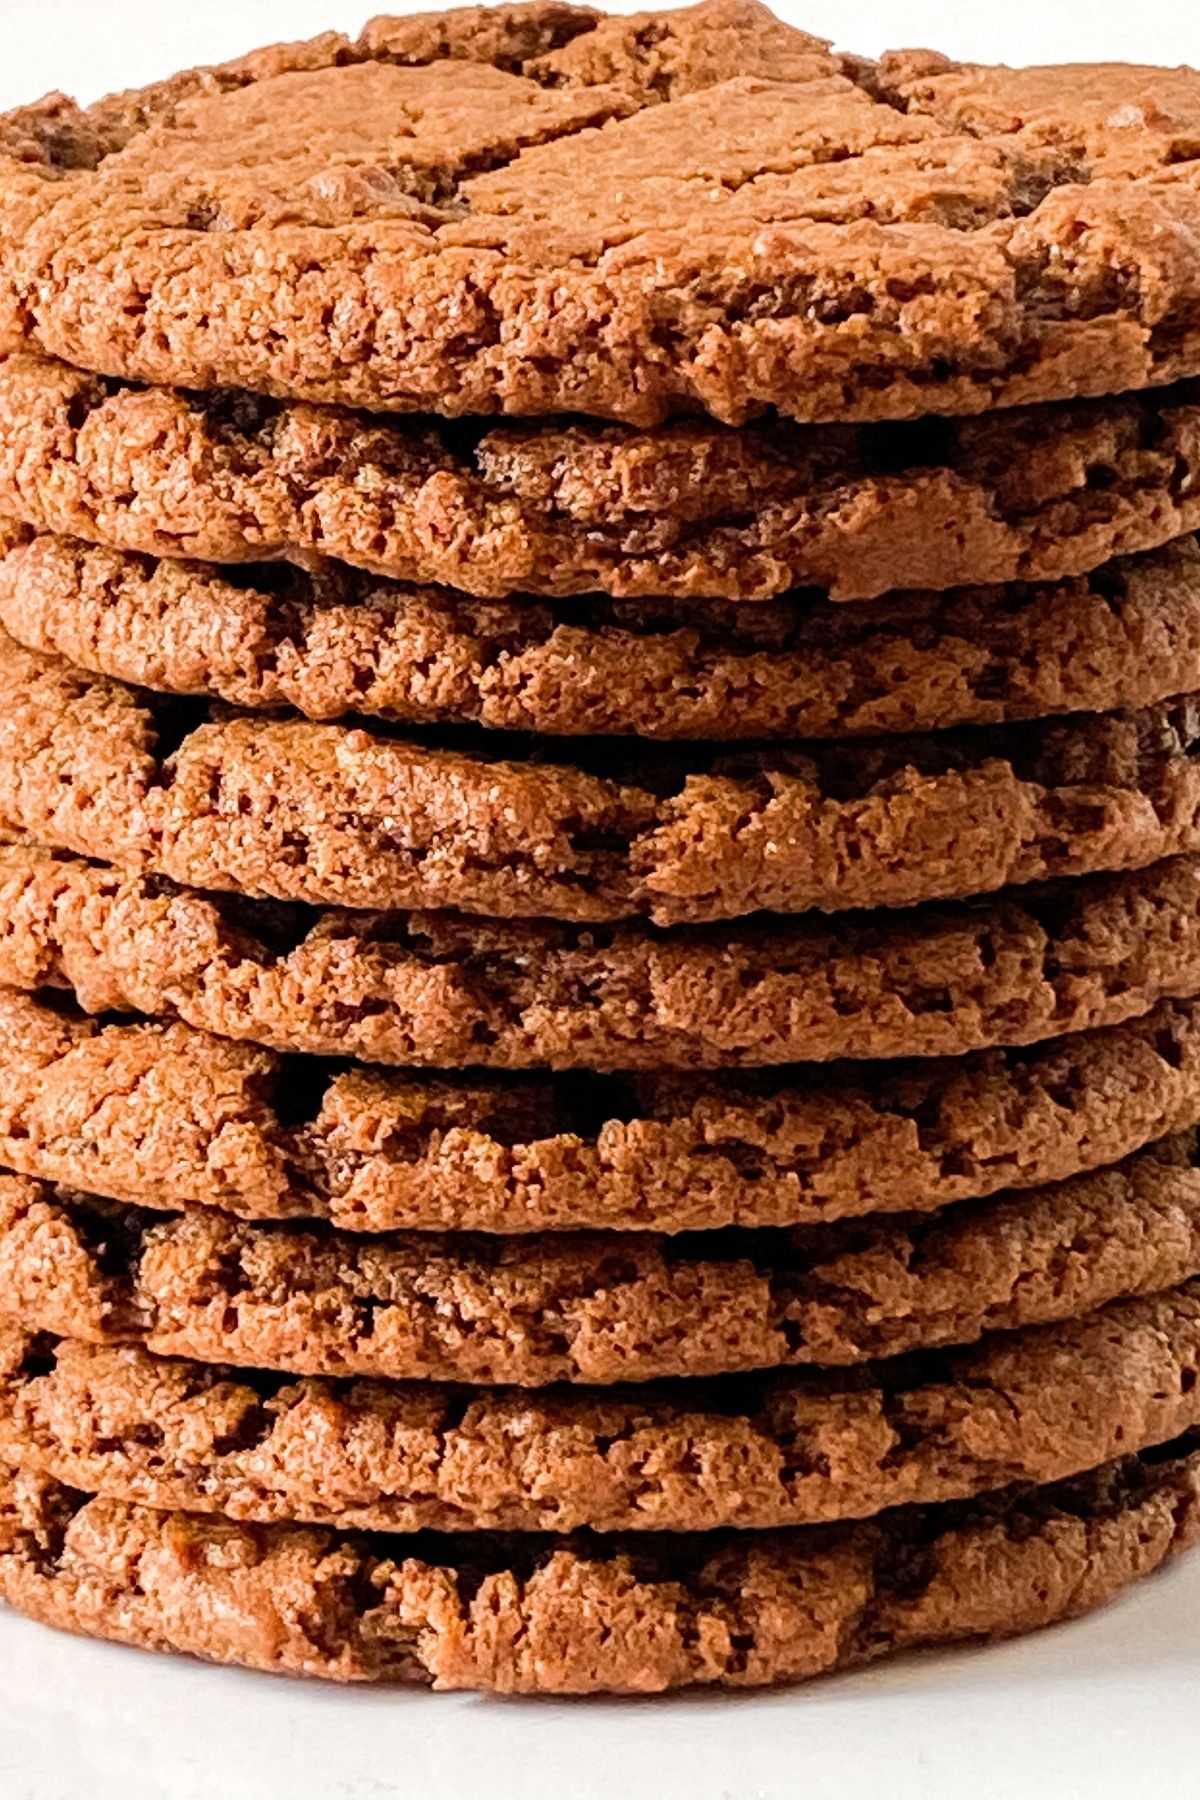 Stack of baked chocolate cookies